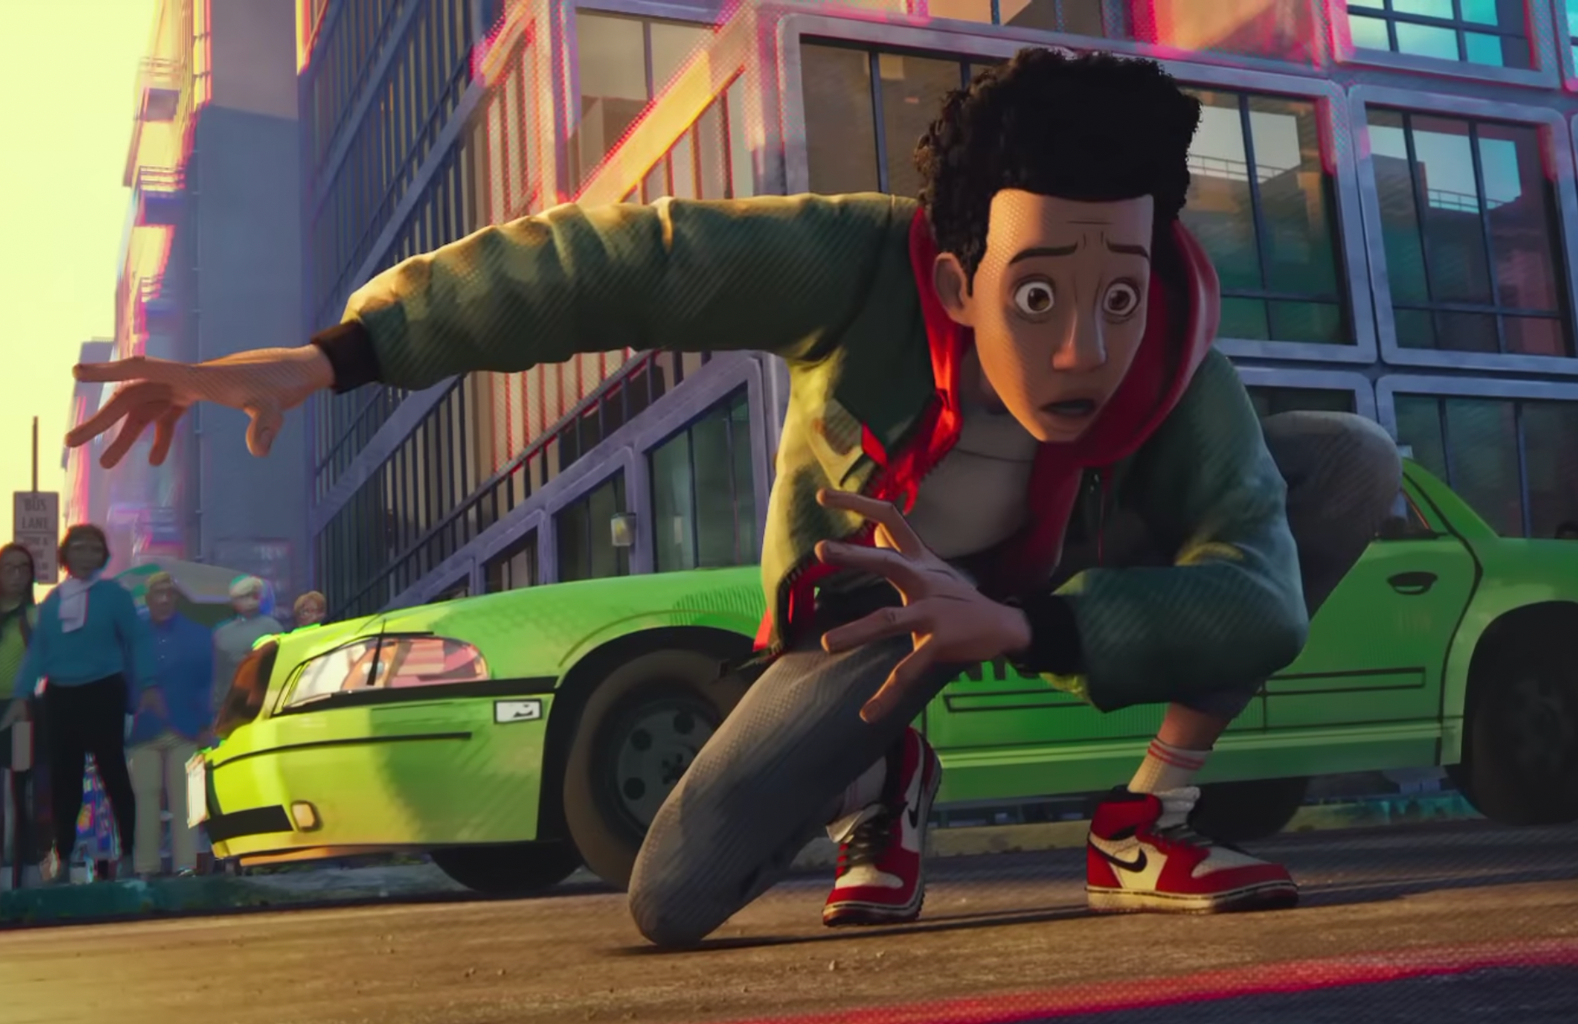 Miles Morales/Spider-Man in Brooklyn. Screenshot from Sony Pictures Entertainment\'s Official Trailer for \